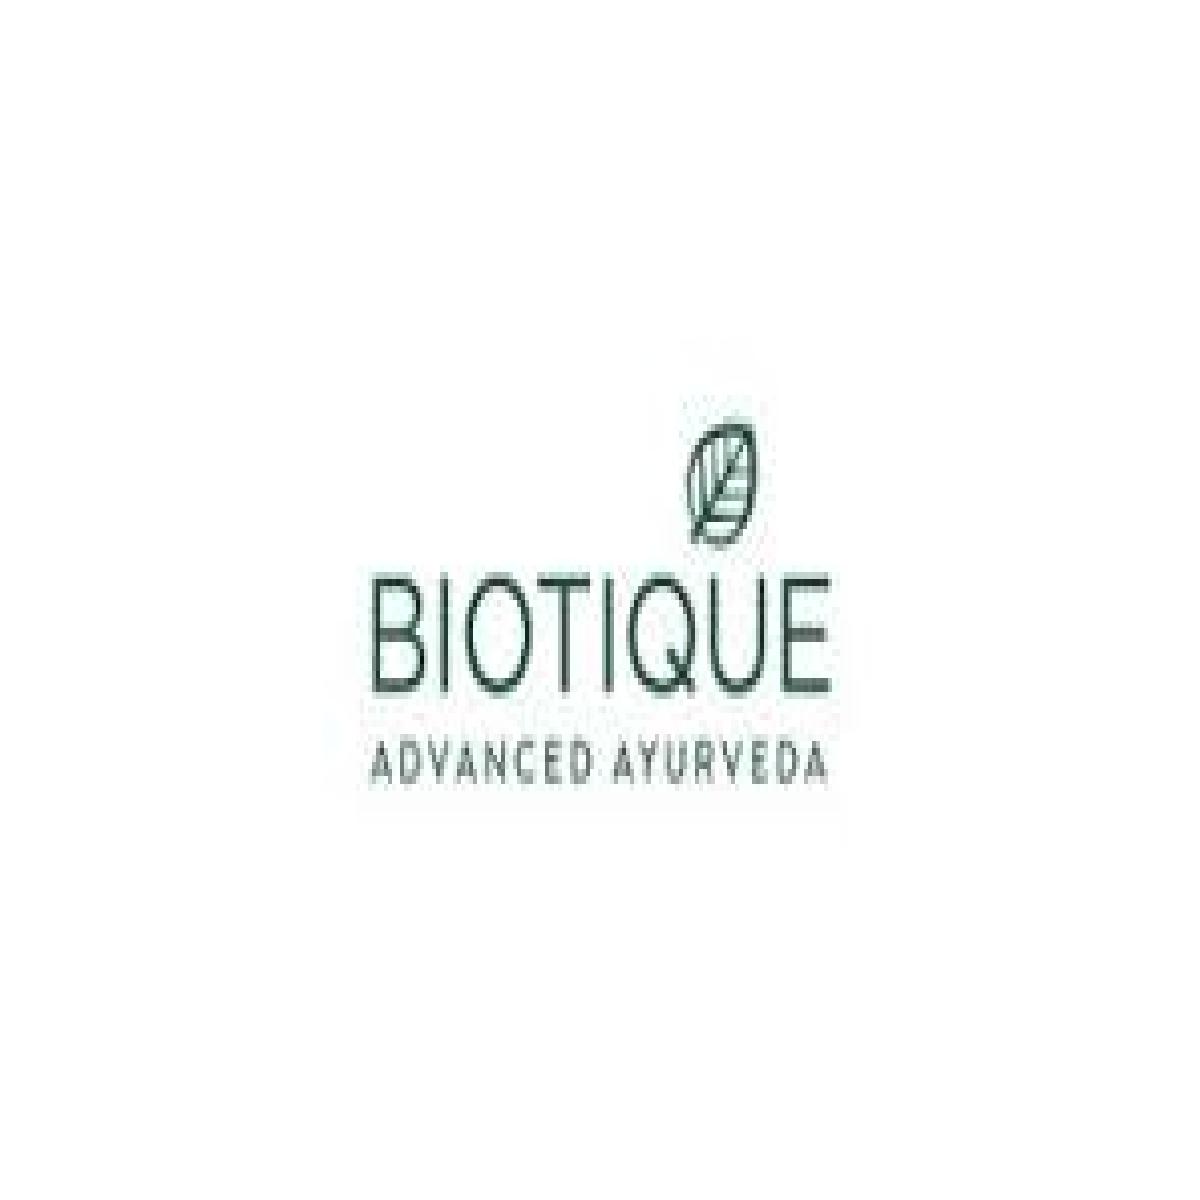 SuperCluster Pi Acquires Auravedic, an Ayurvedic Beauty and Wellness Brand - a Kumkumadi Category Leader